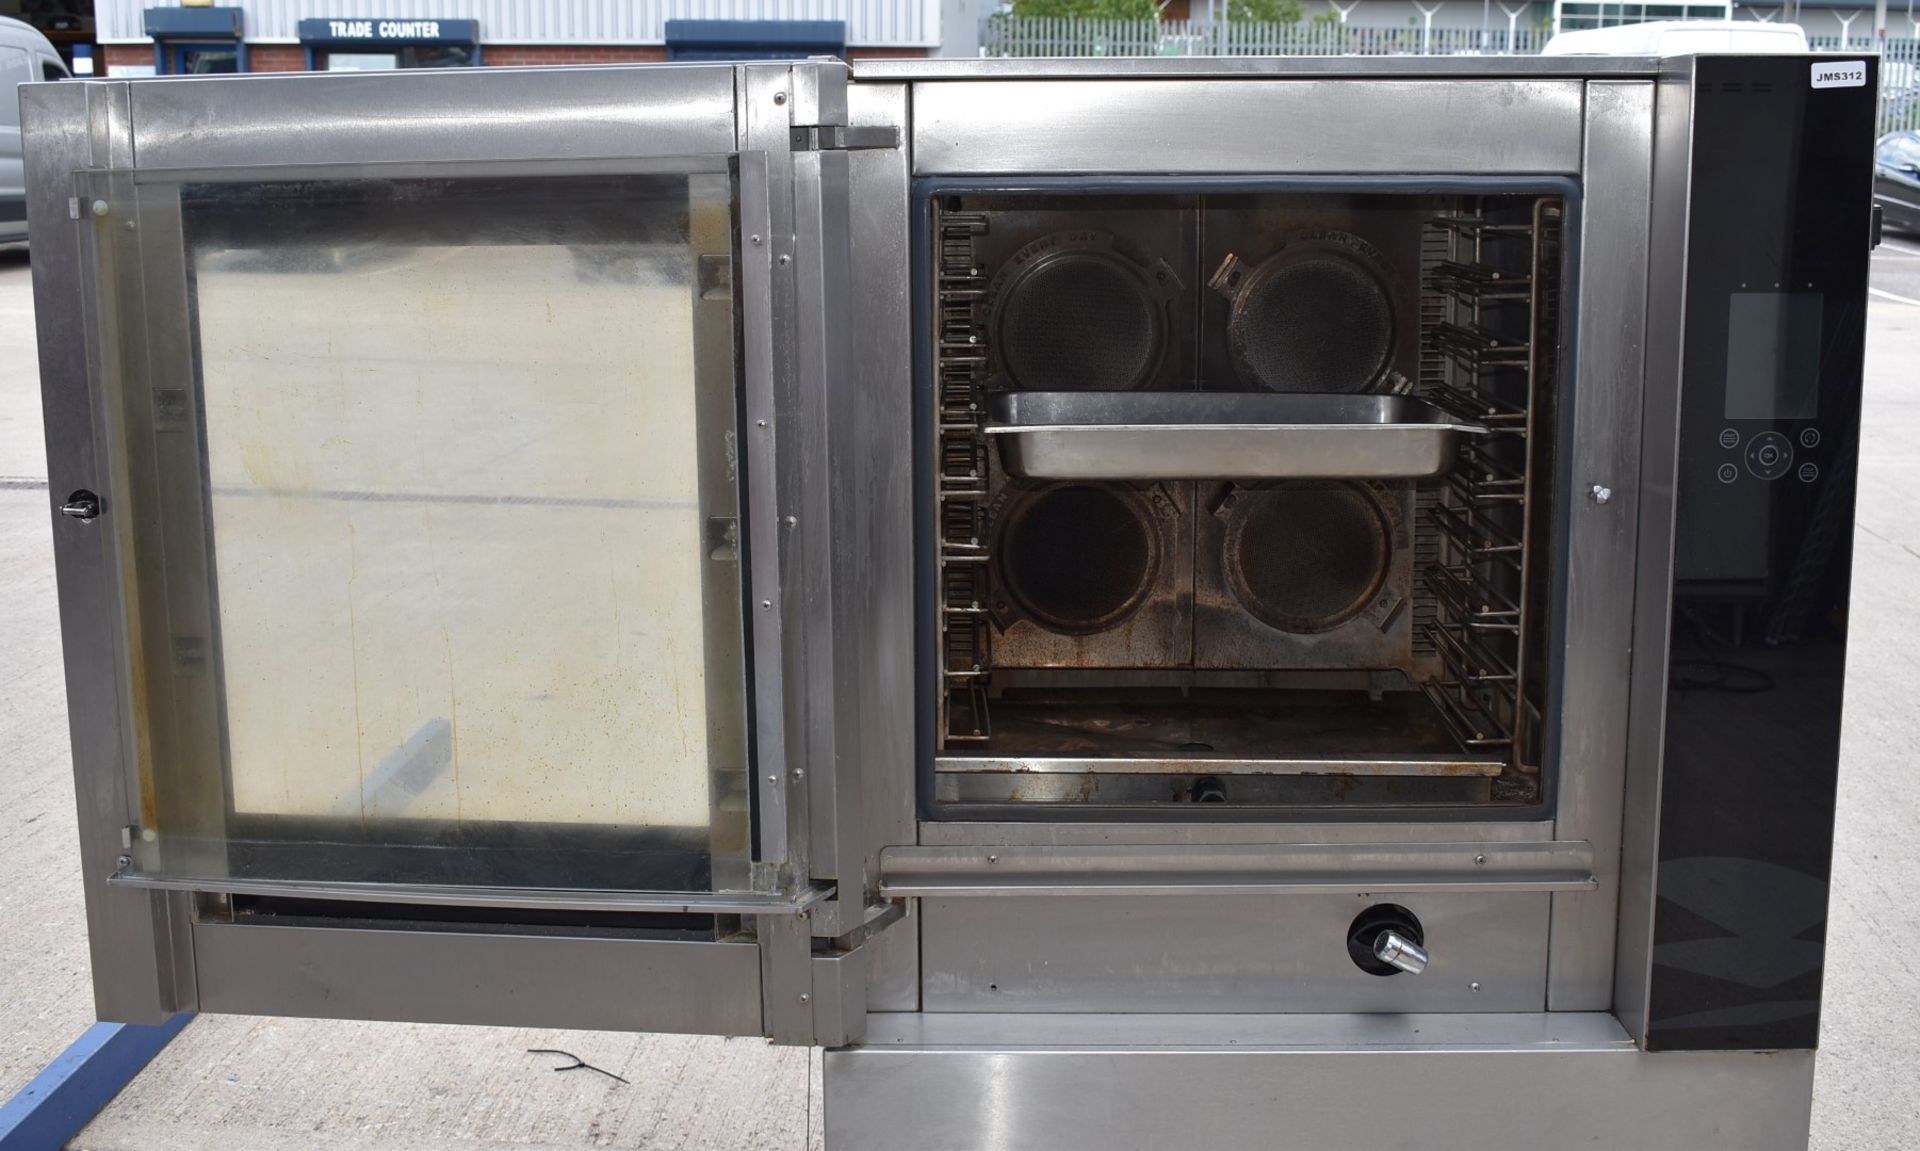 1 x Fri-Jado Turbo Retail 8 Grid Combi Oven - 3 Phase Combi Oven With Various Cooking Programs - Image 3 of 24